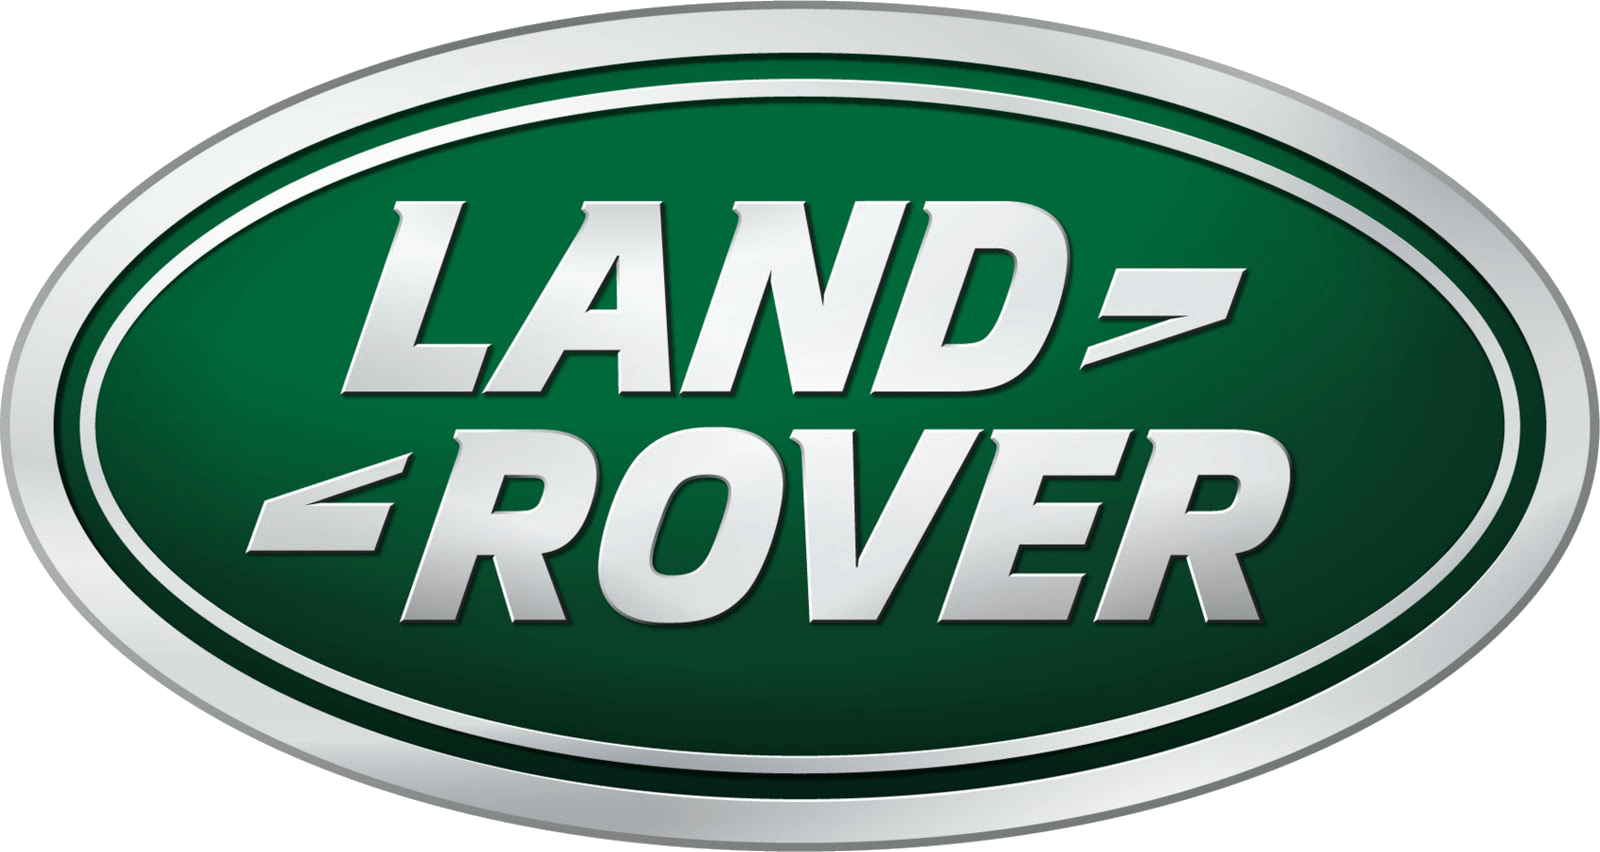 White and Green Oval Logo - Land Rover Logo, Land Rover Car Symbol Meaning and History | Car ...